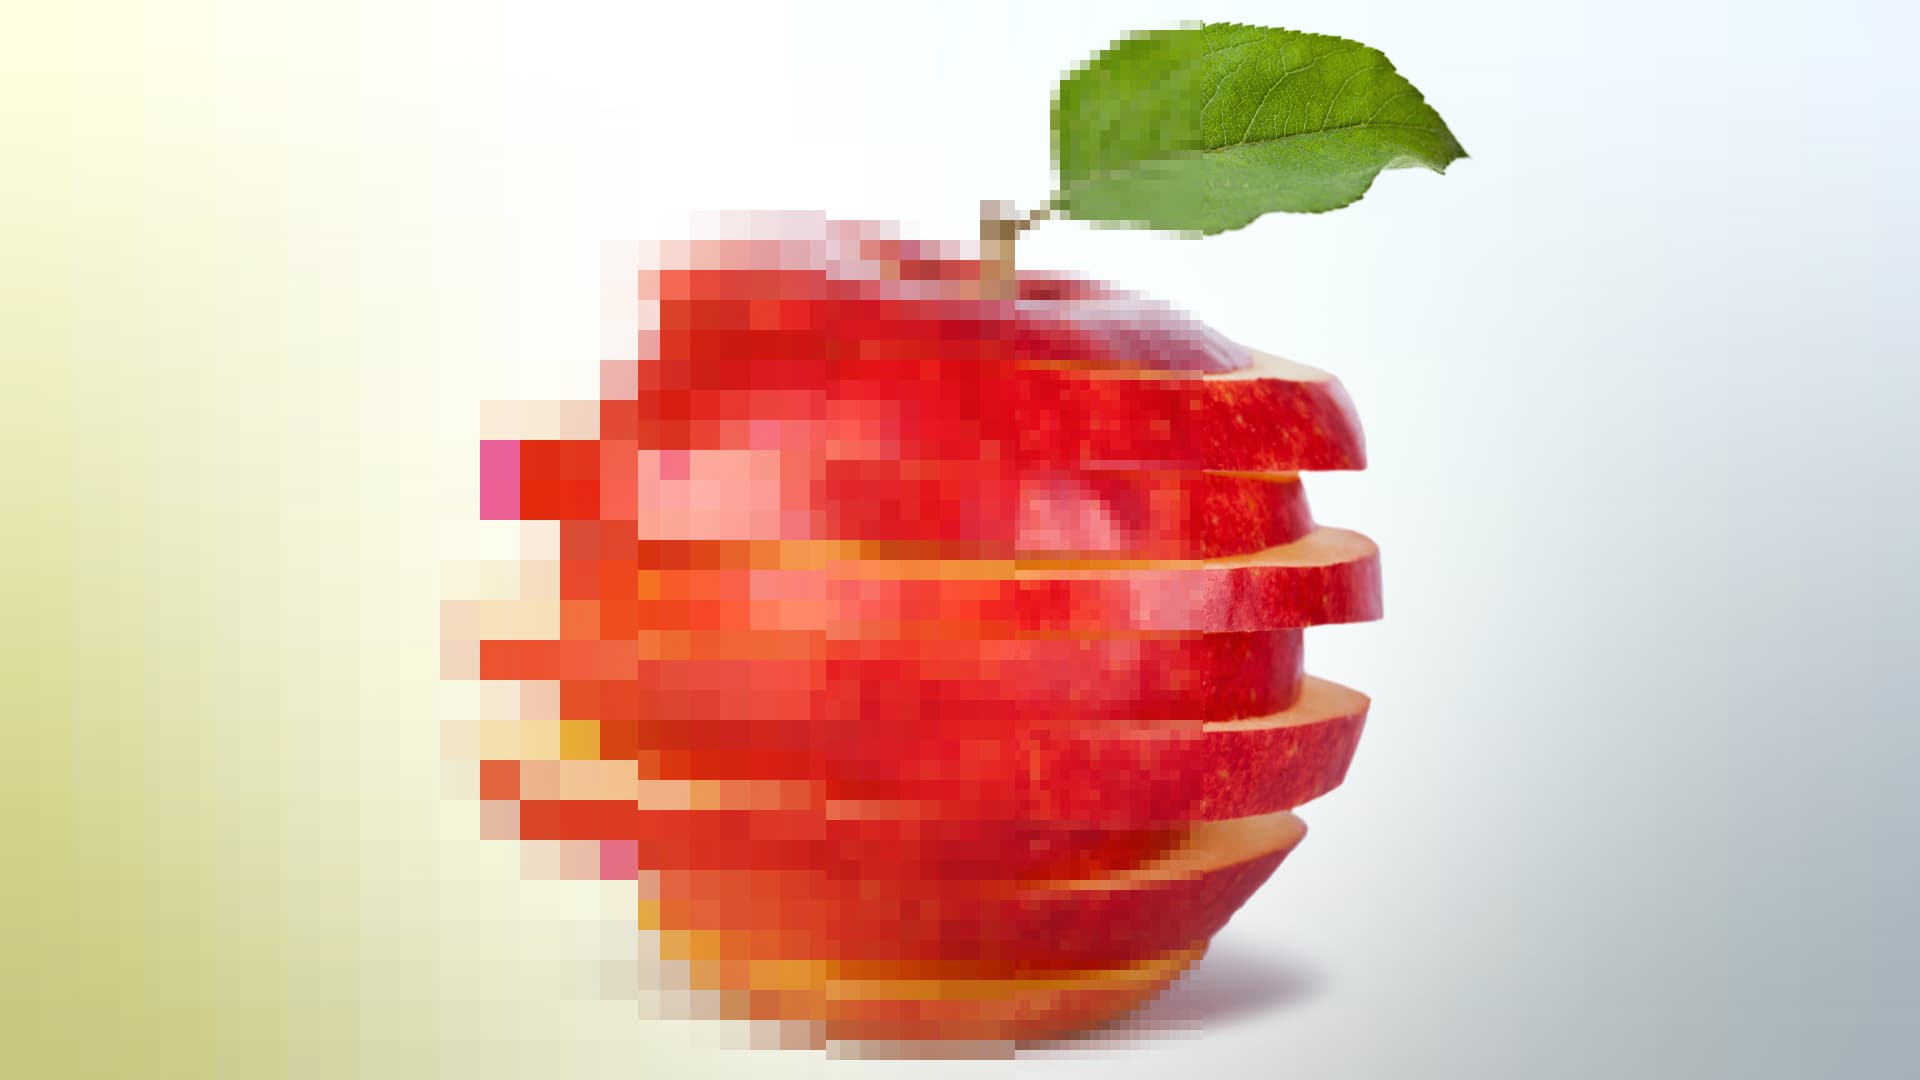 a sliced red apple that is half pixelated and half clear